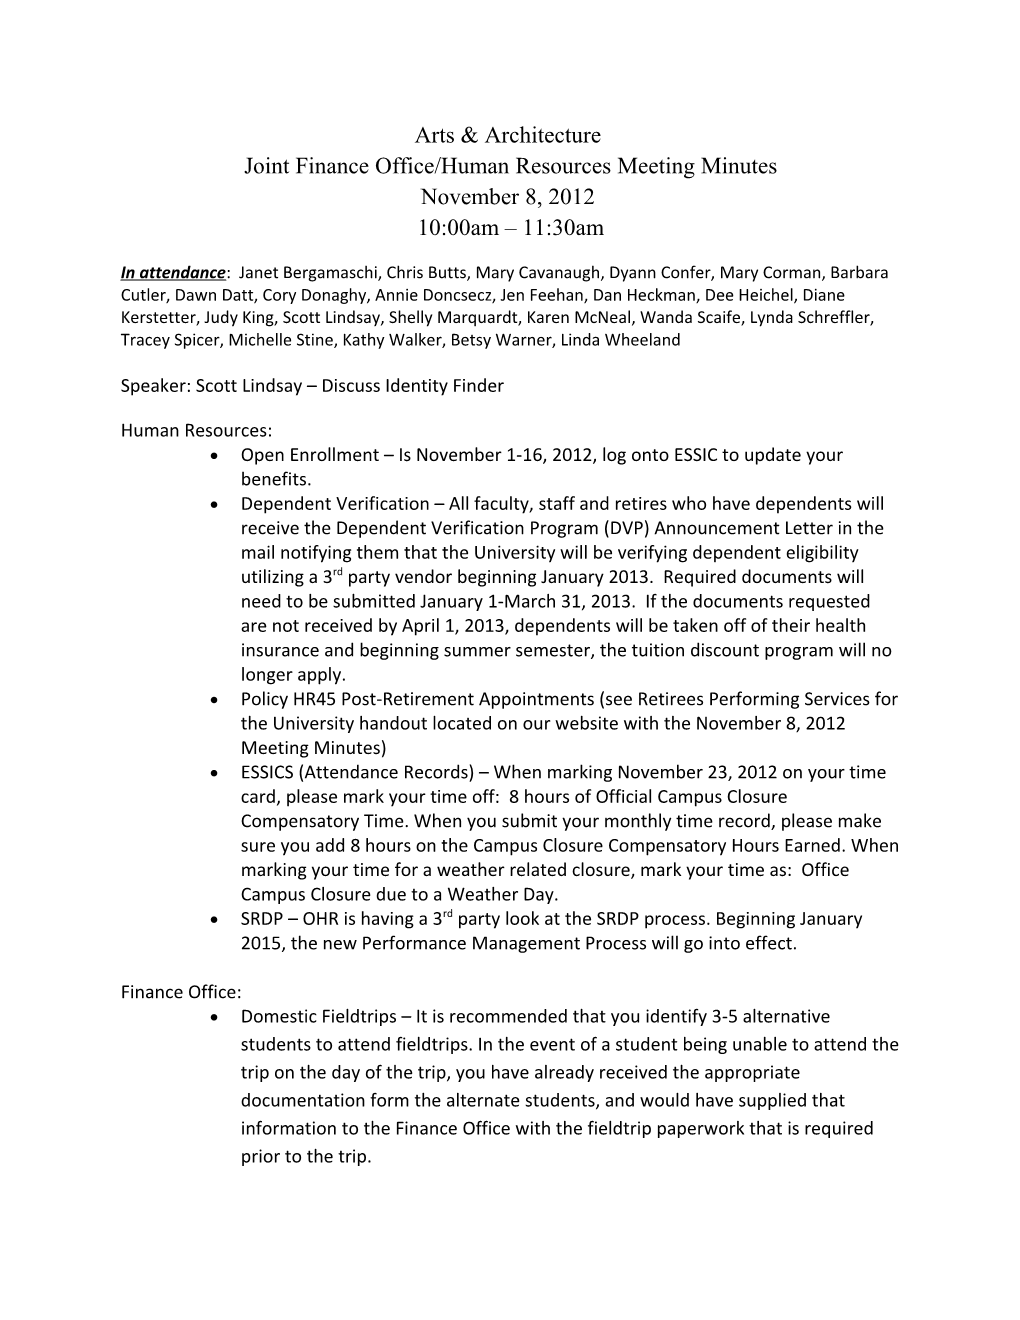 Joint Finance Office/Human Resources Meeting Minutes s1